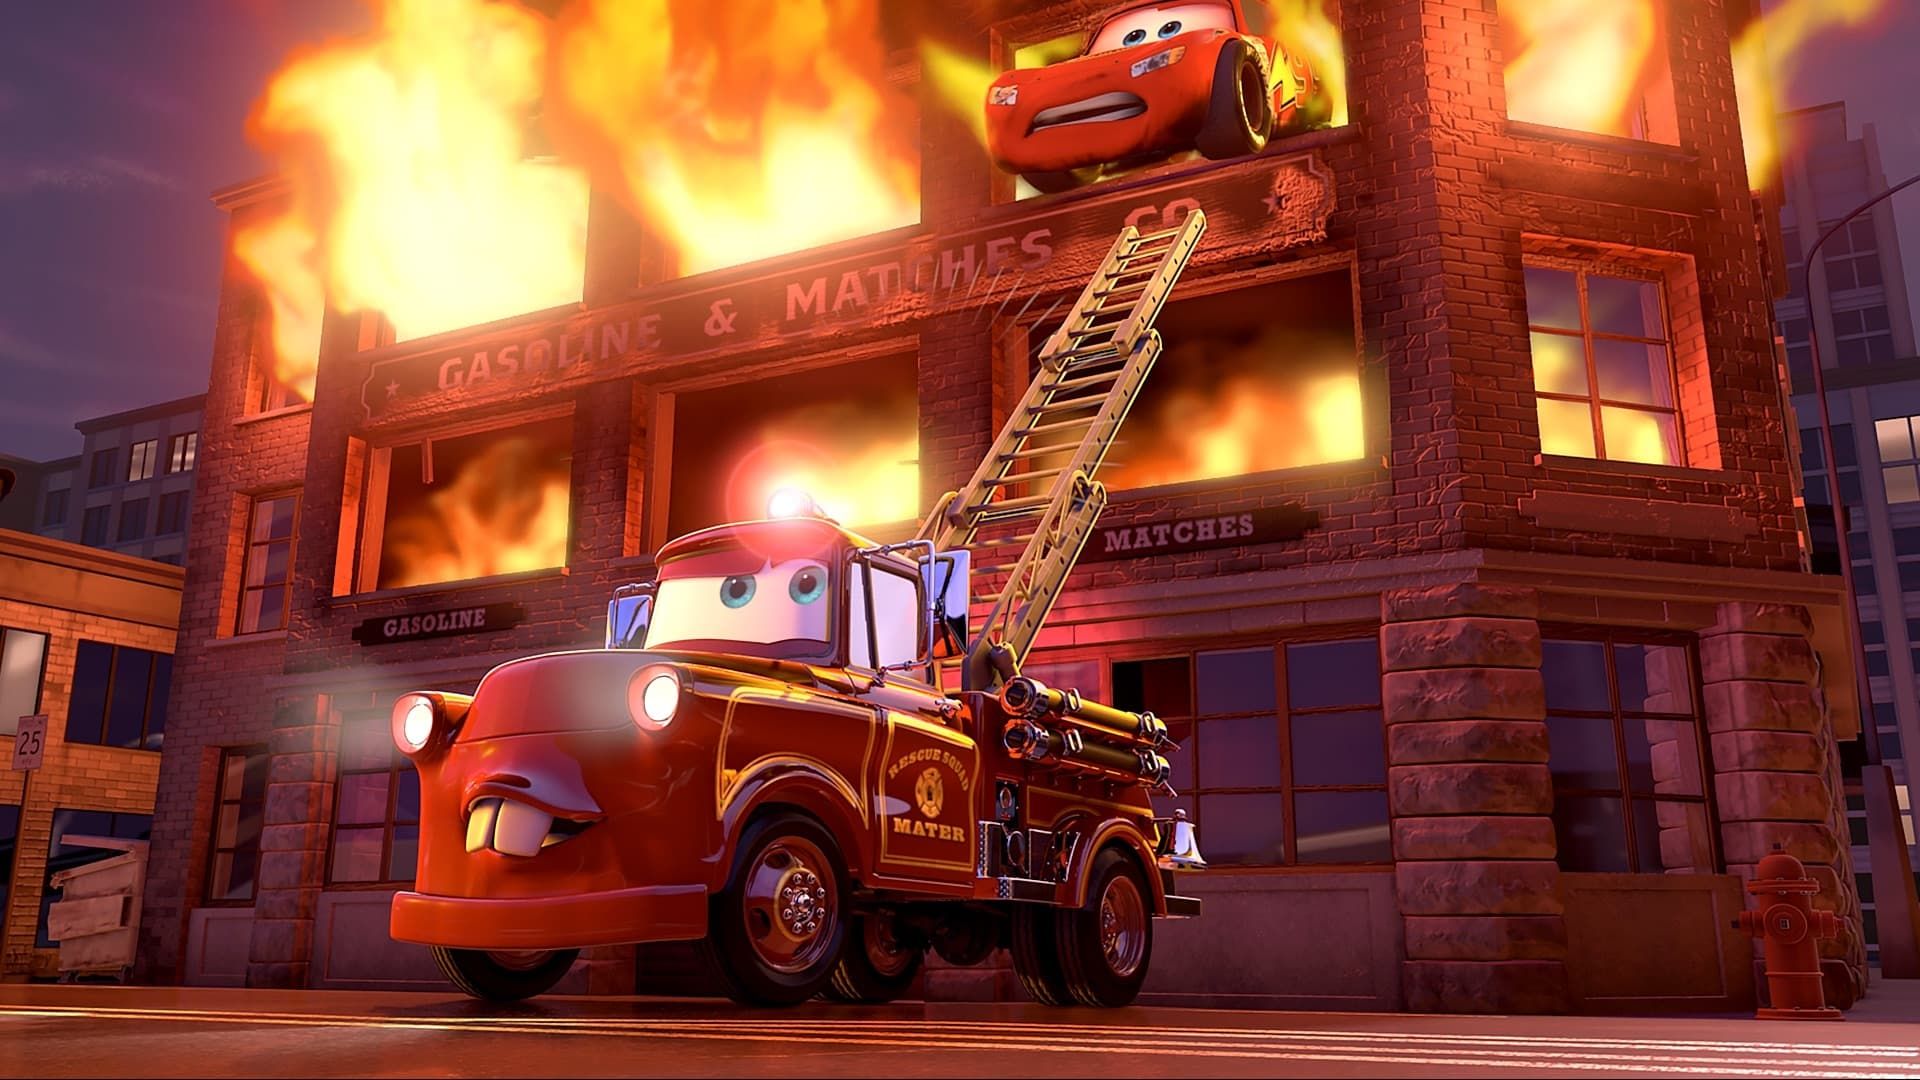 Mater's Tall Tales background